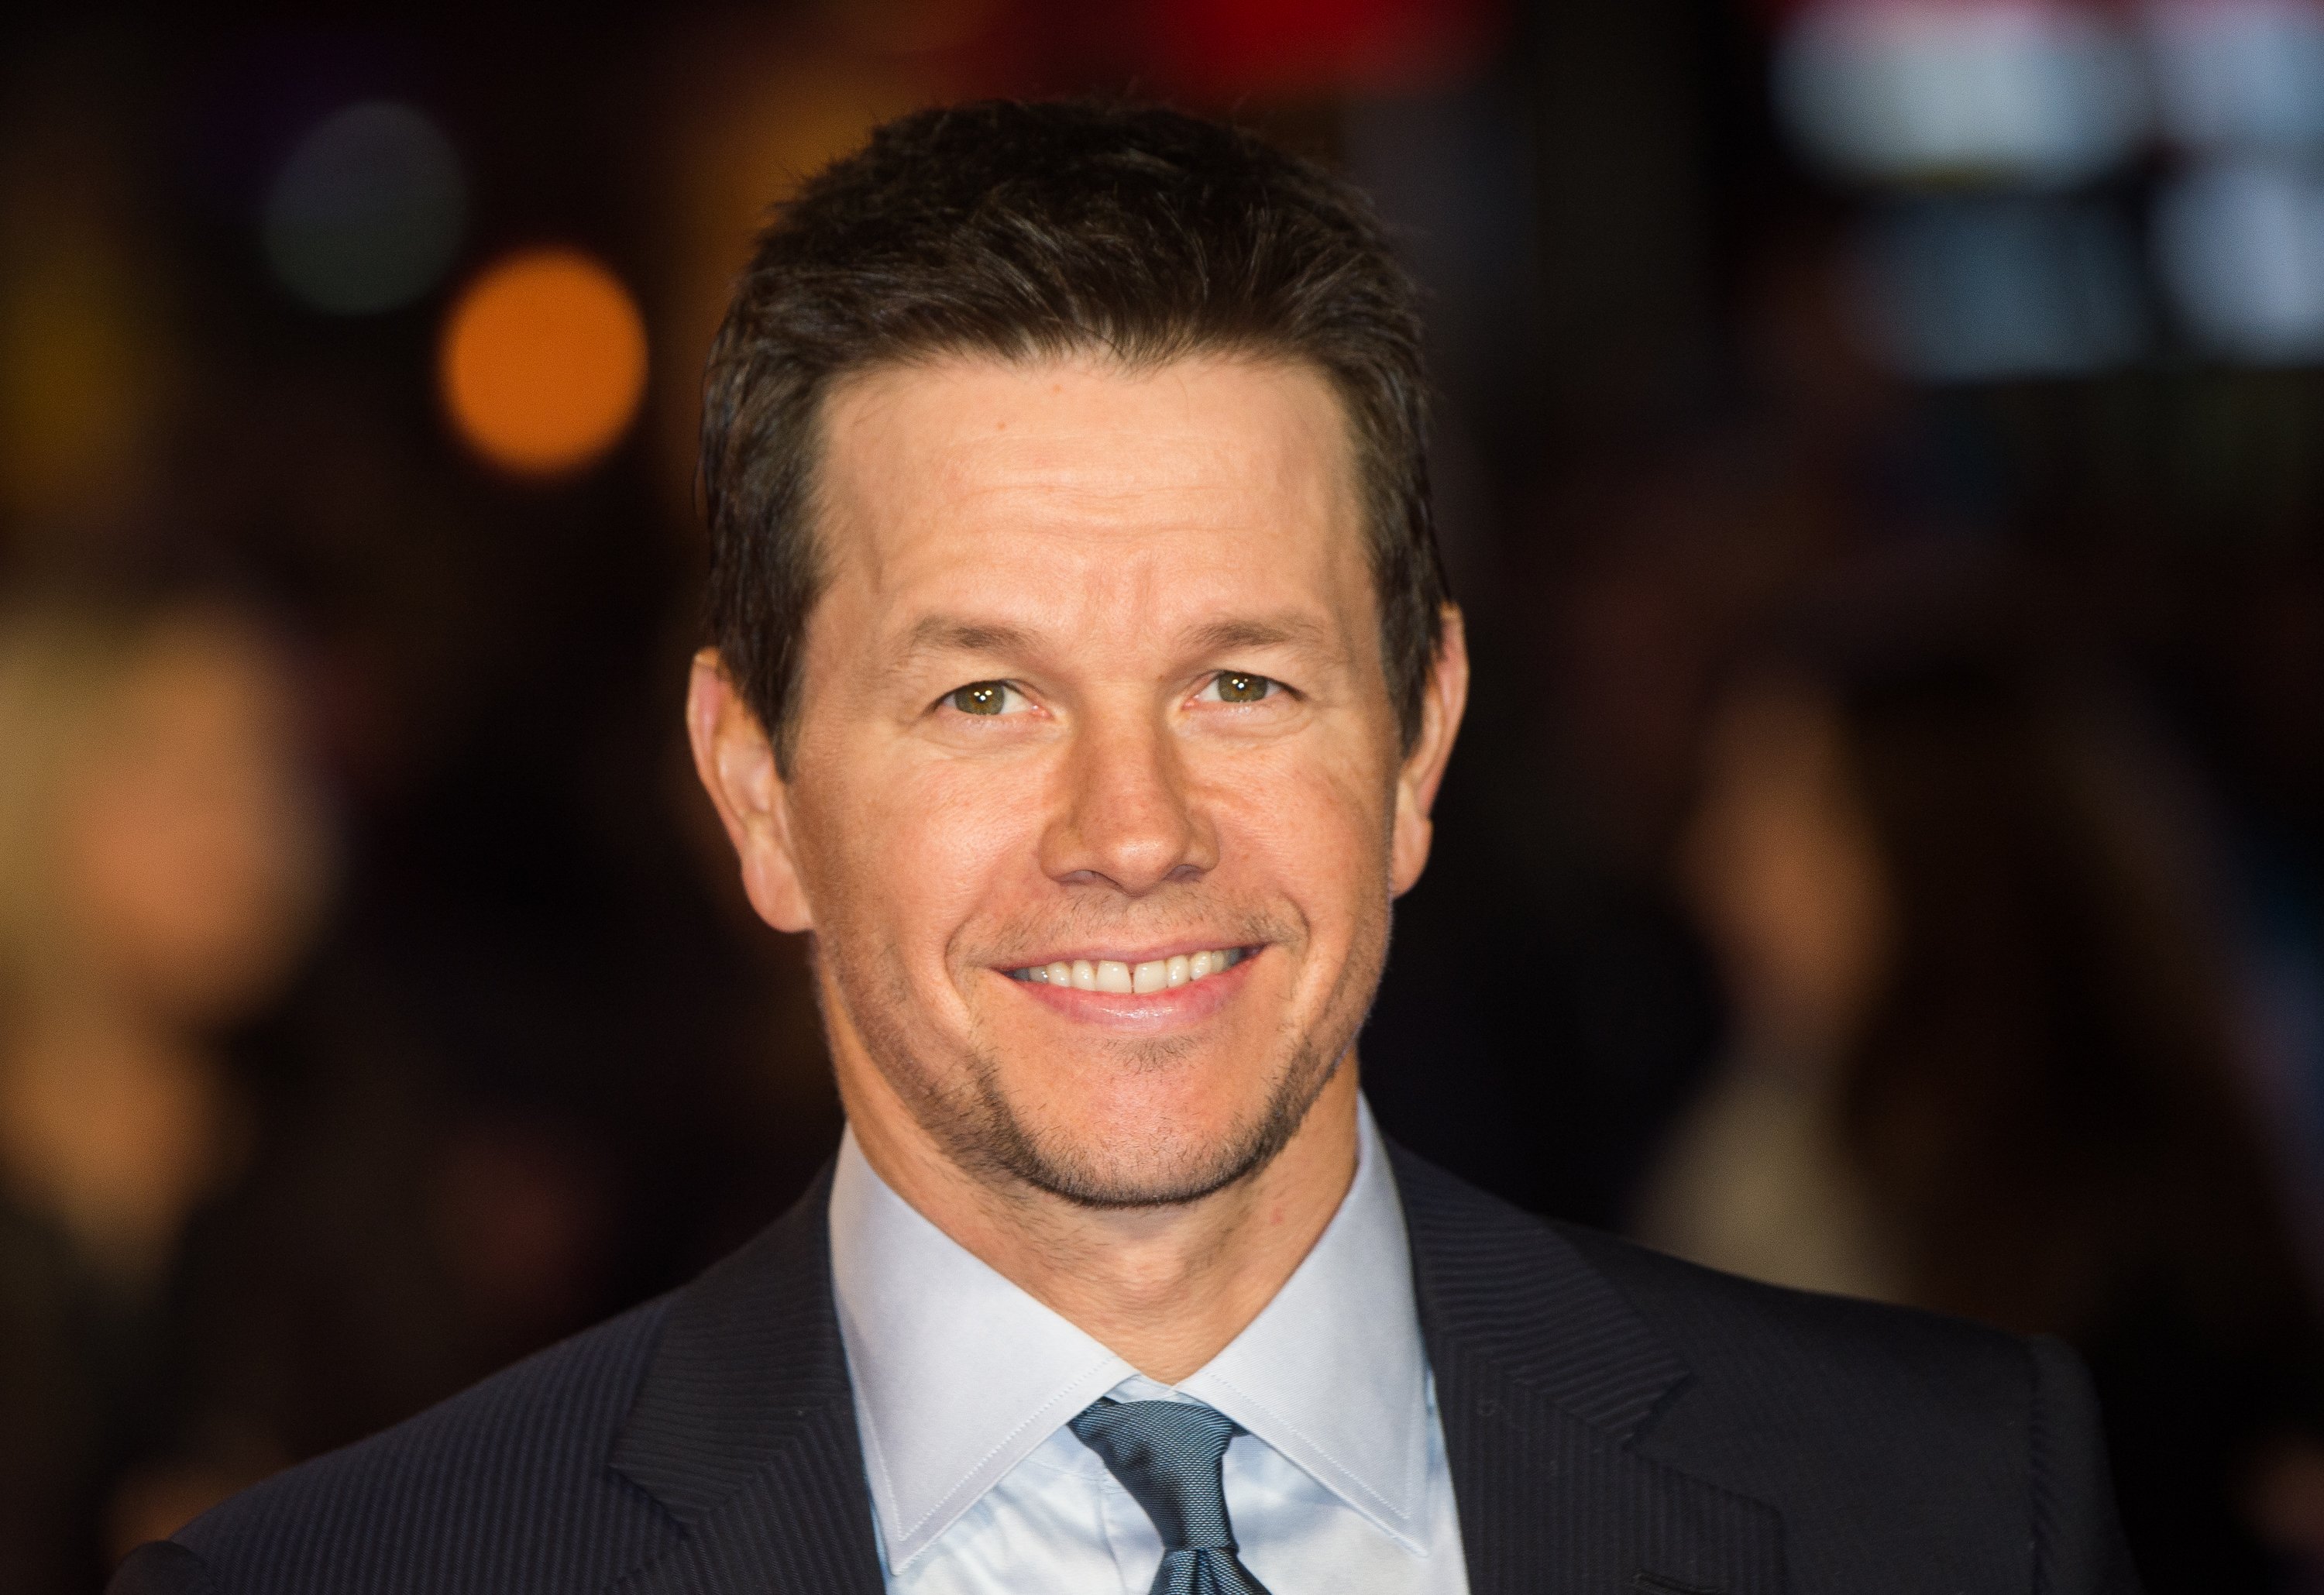 Mark Wahlberg attends the UK Film Premiere of "Daddy's Home" at Vue West End on December 9, 2015 in London, England | Photo: Getty Images